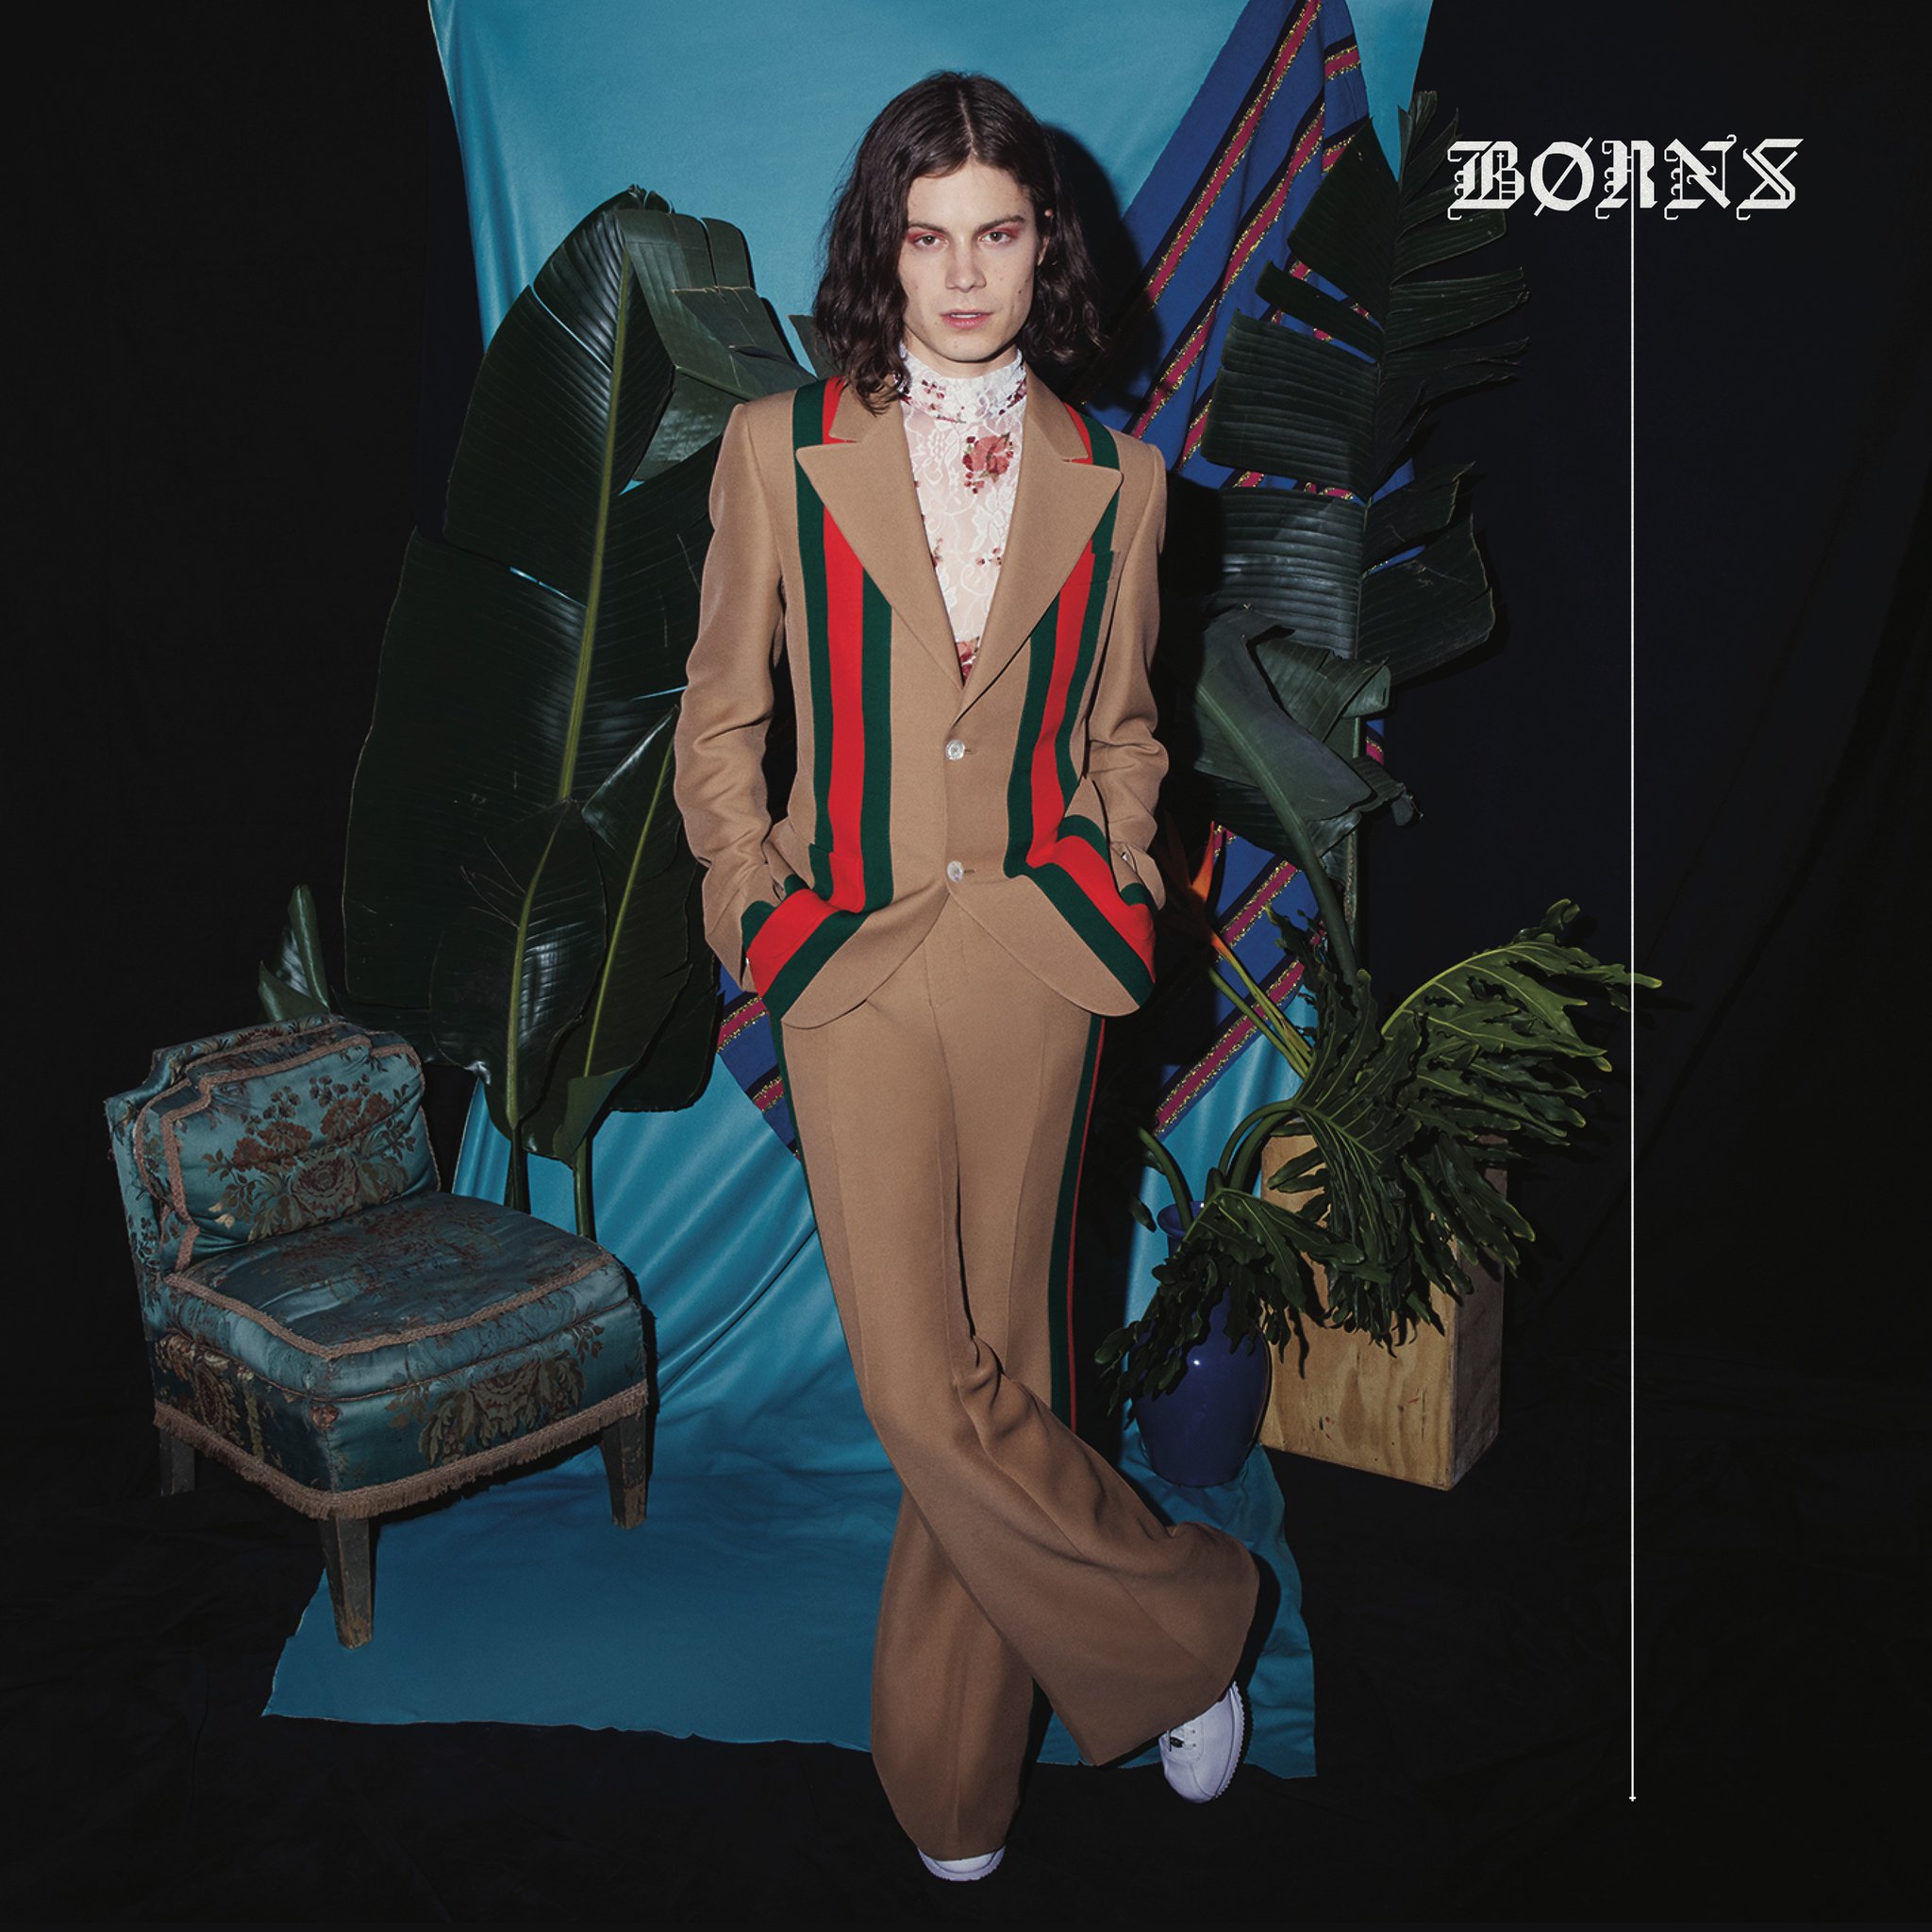 Our review of BØRNS 'Blue Madonna'